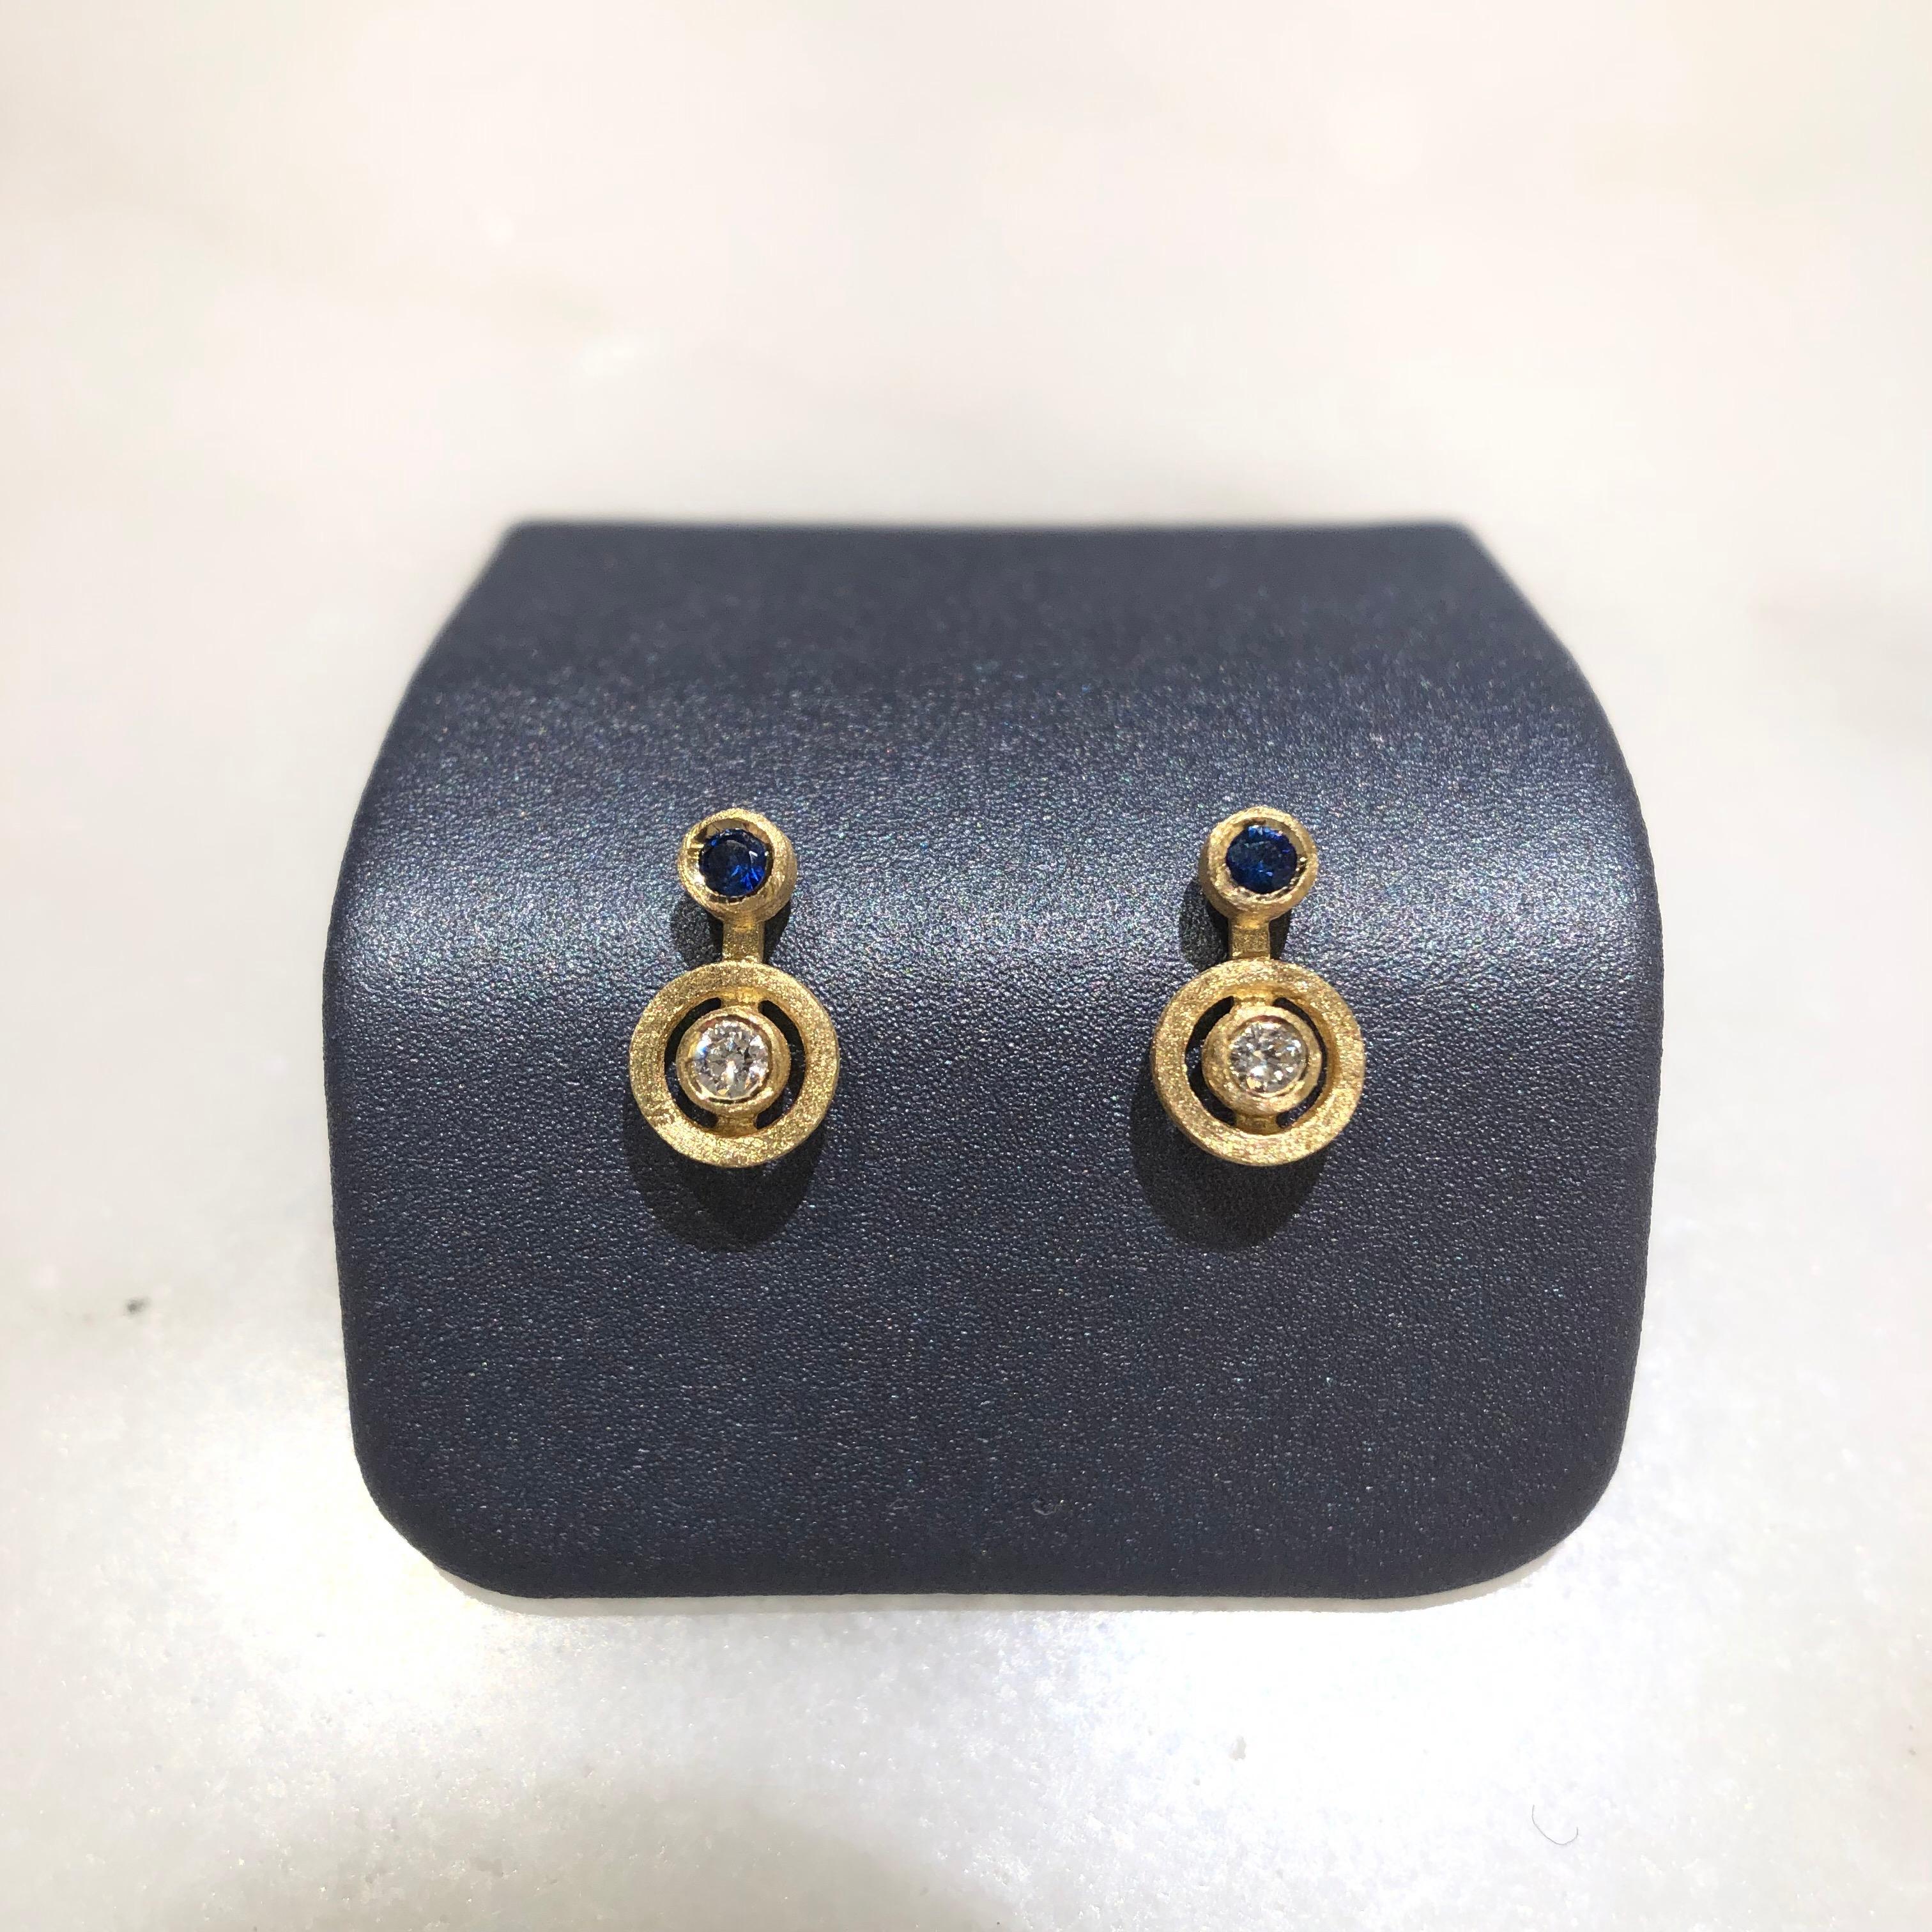 Nova Stud Earrings handcrafted in London by jewelry artist Shimell and Madden in satin-finished 18k yellow gold with 0.08 total carats of round brilliant-cut white diamonds and two vibrant blue sapphires, all bezel-set and attached to central 18k